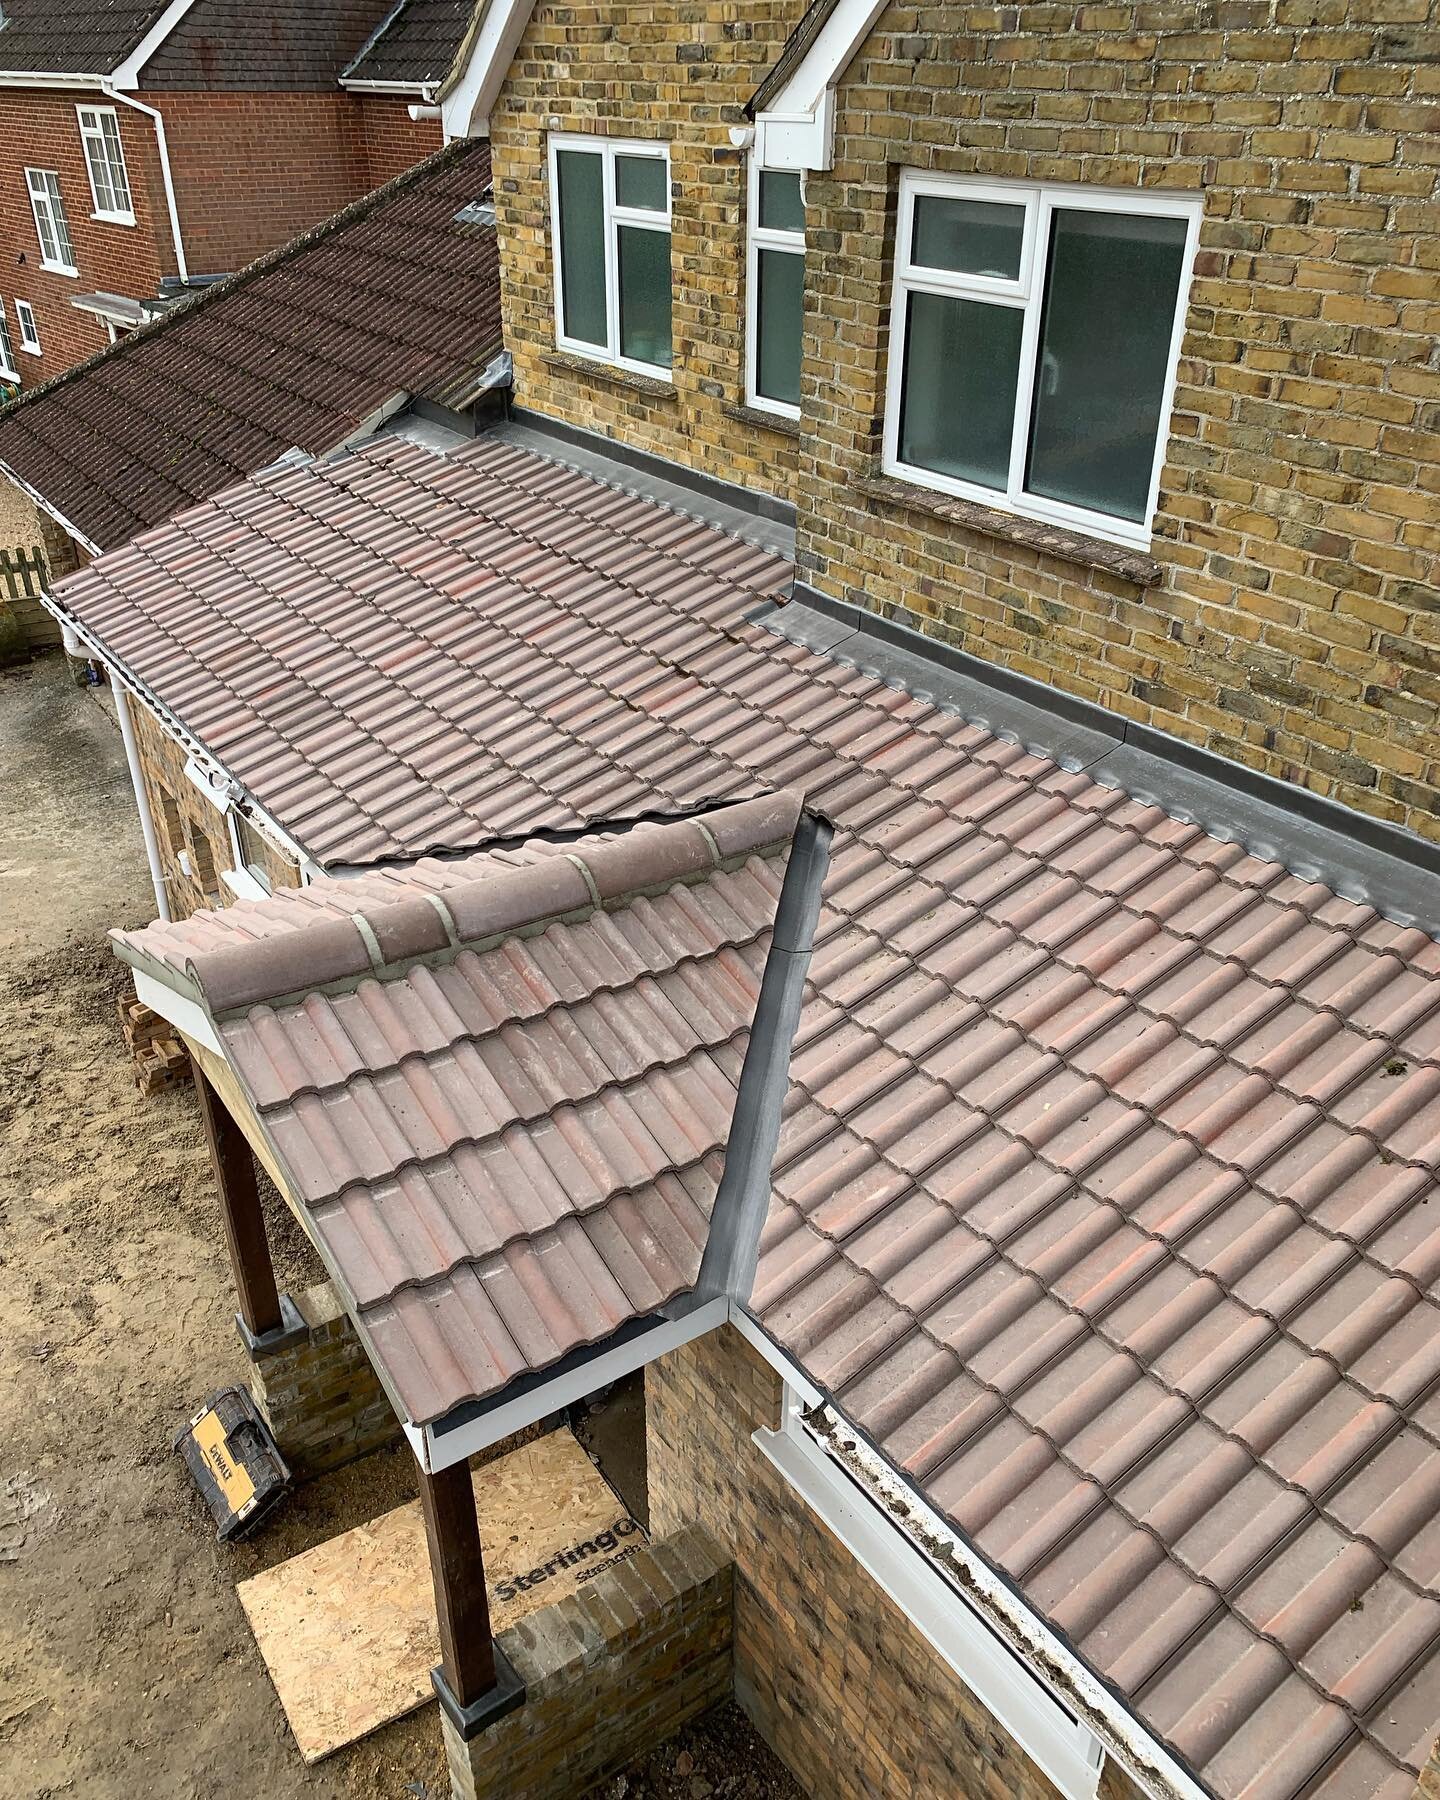 Redland Double Roman &amp; Plain Tiles in Breckland Brown with lead flashings #slatersroofingltd #lead #leadporn #roofing